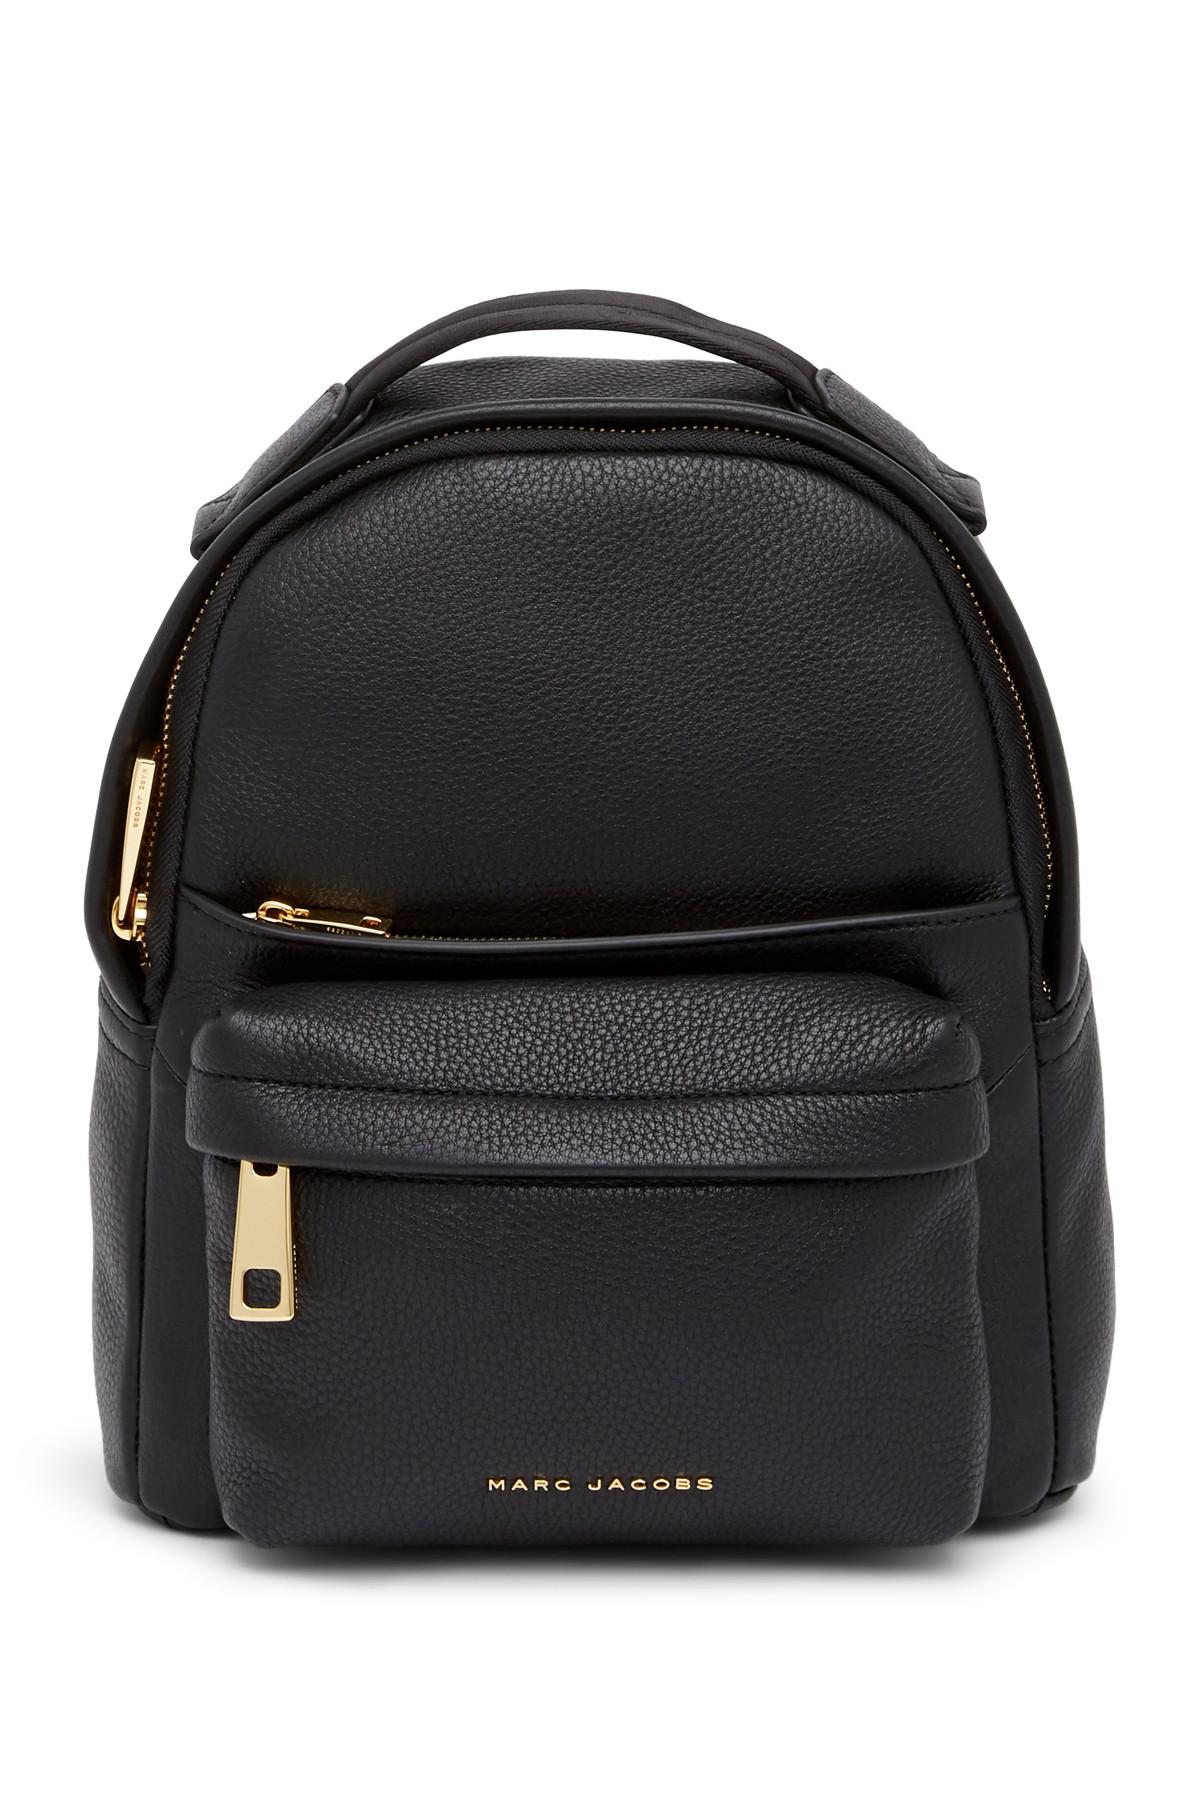 5 Best Women's Backpack For Work In The Uk — Luggage Savvy | The Art of ...